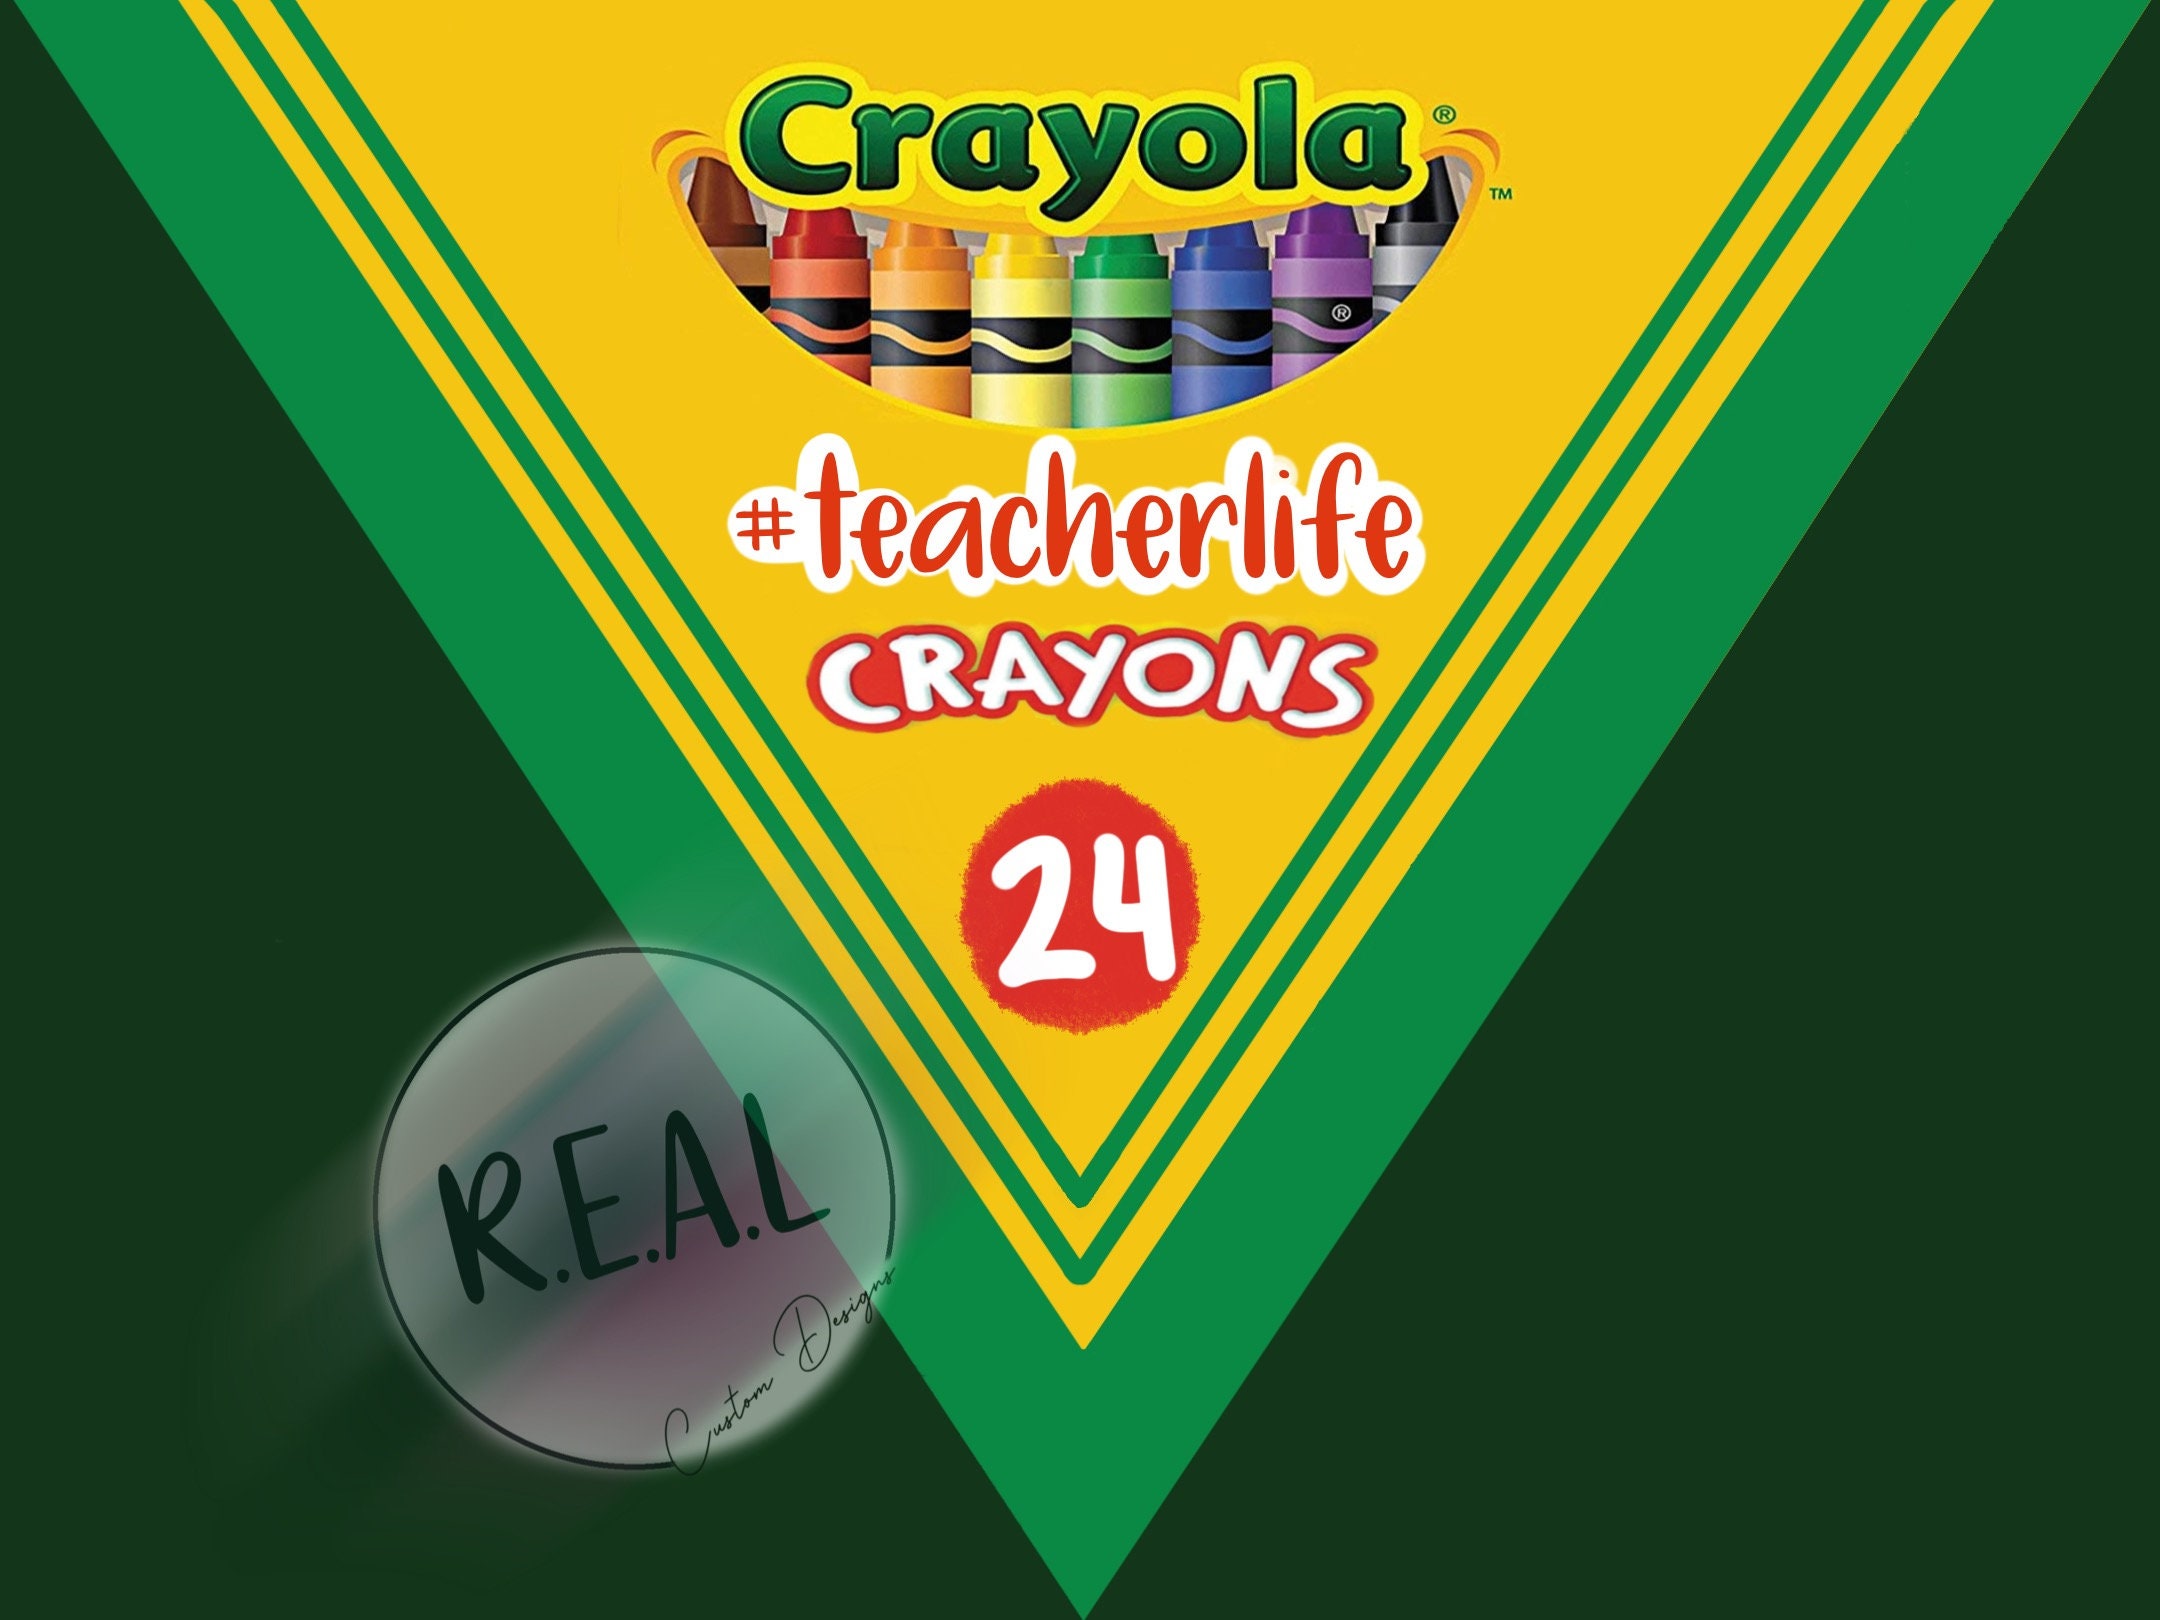 CRAYOLA High Quality Wooden Big Crayon for Photo Session, Photo Prop,  Children Photo Session, School Photos, Props, Huge Crayons Crayolas 